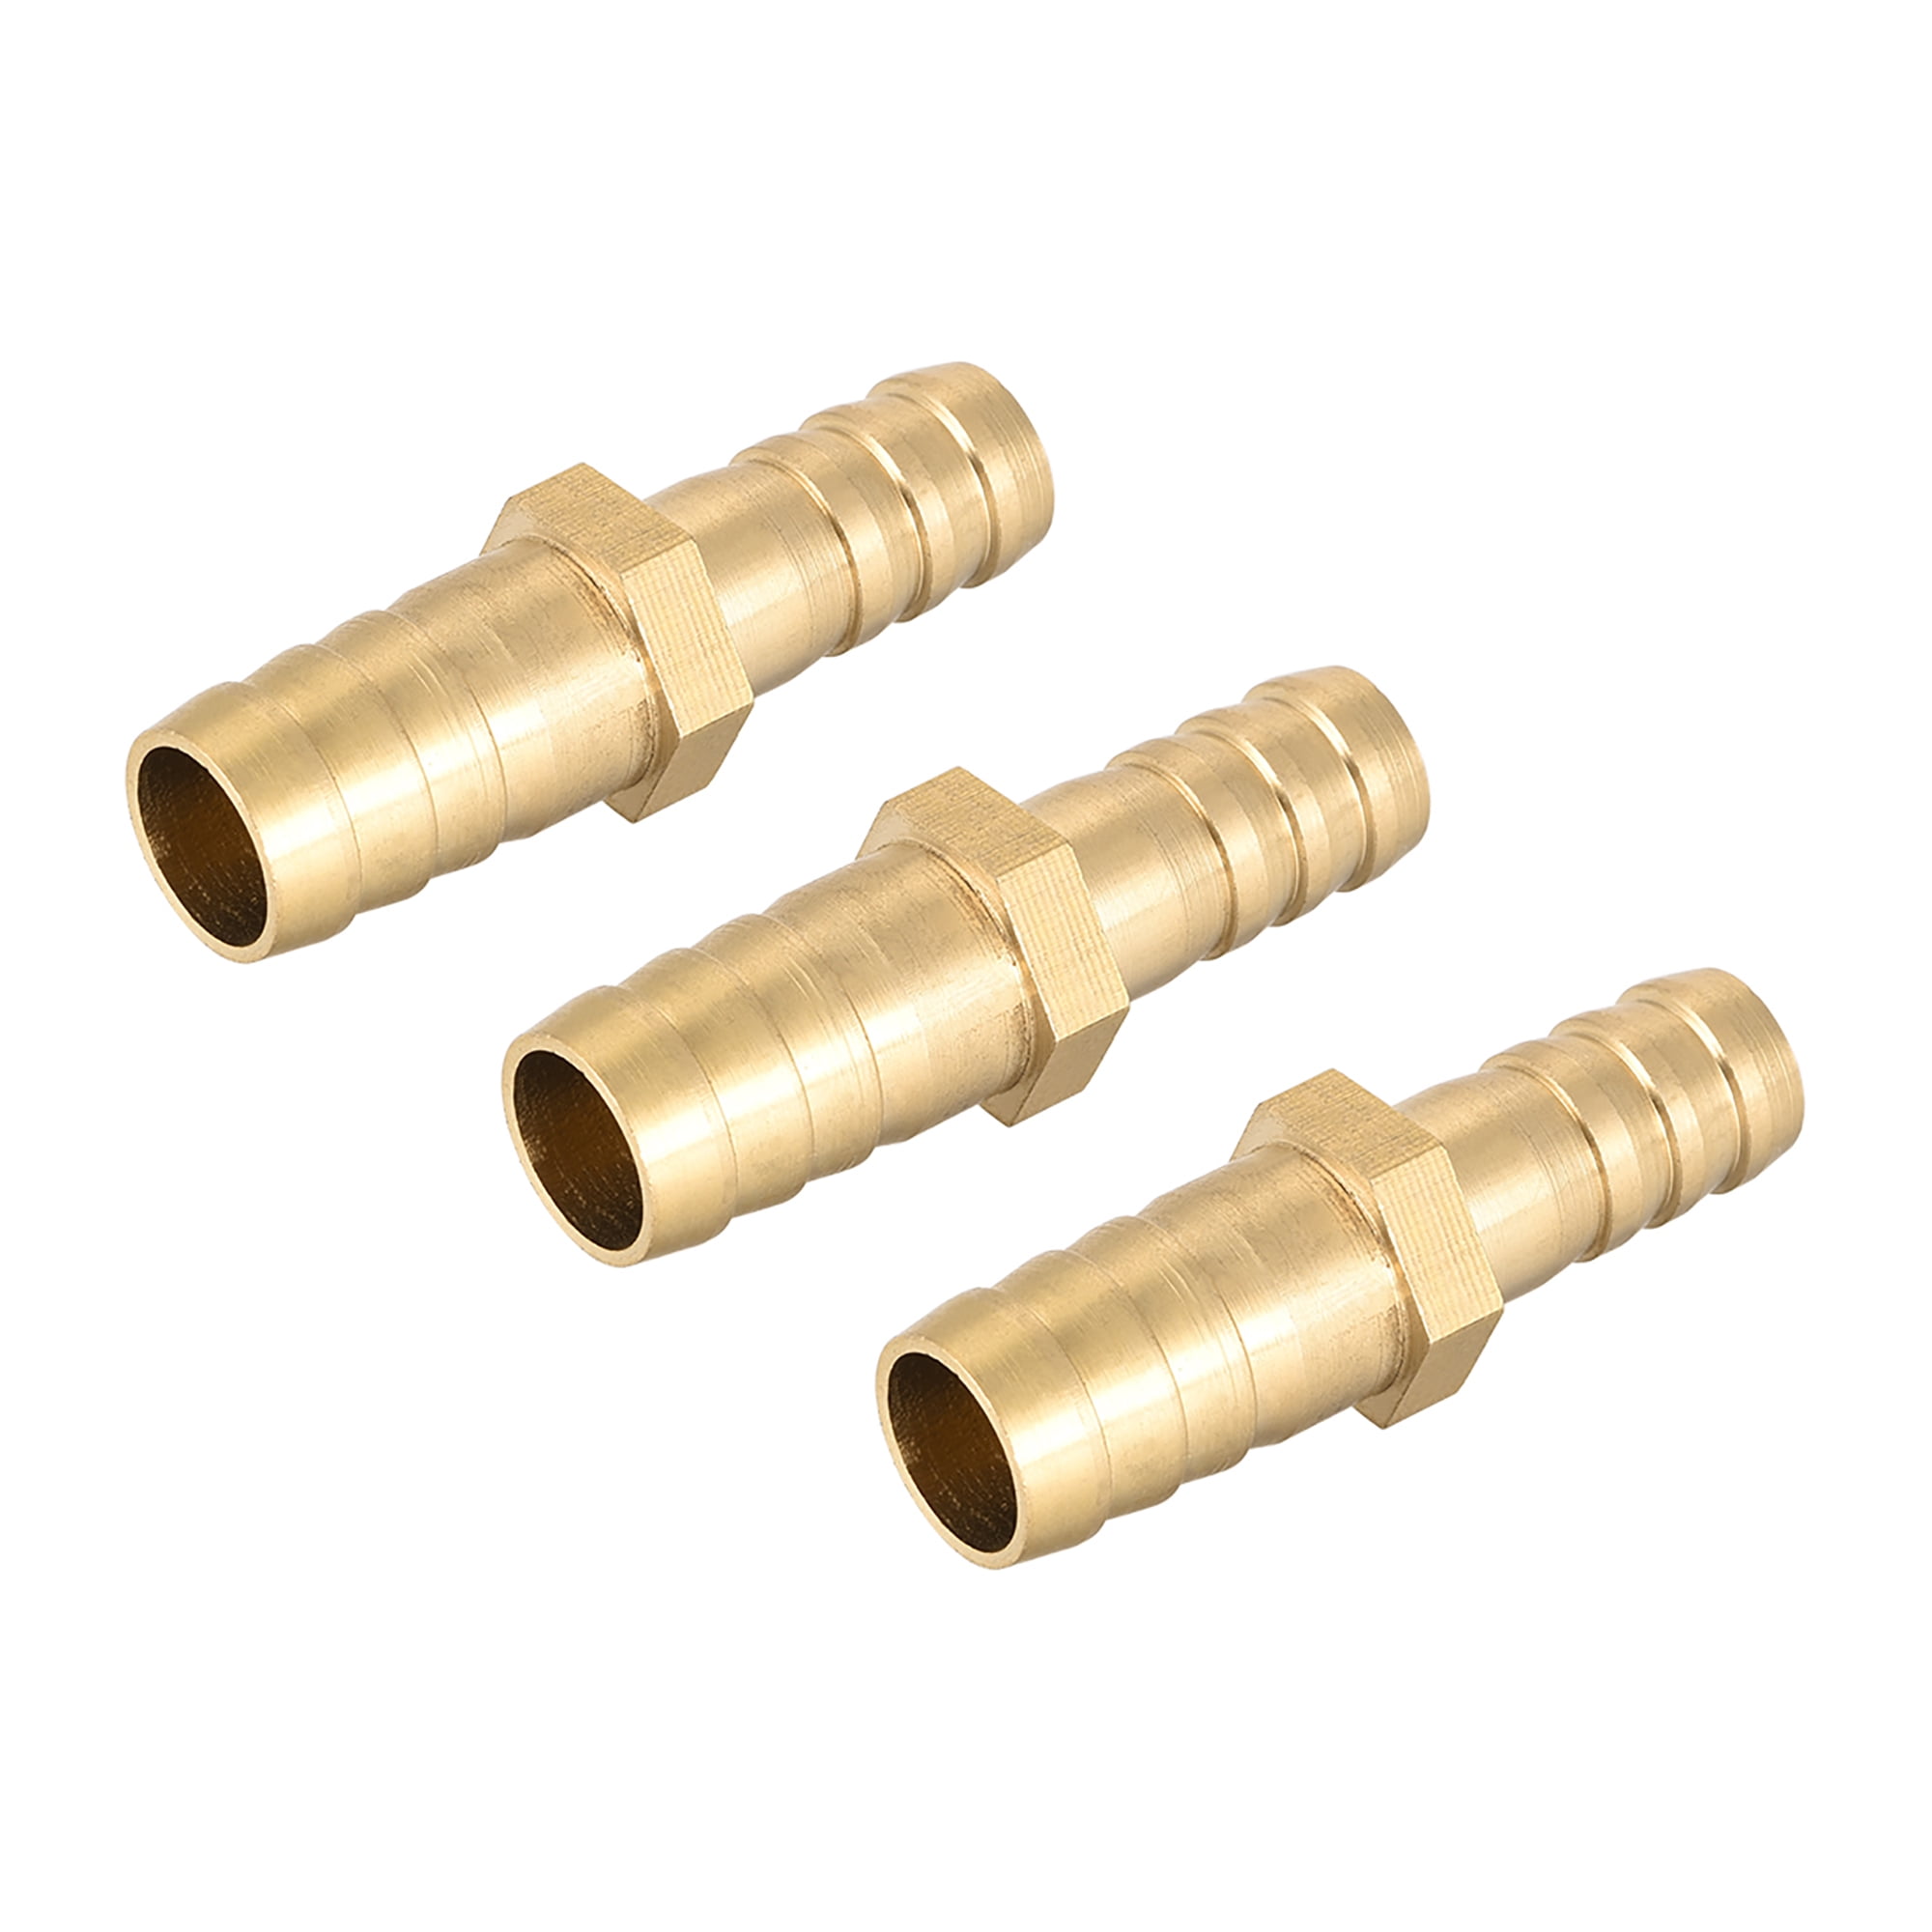 12mm Hose Barb x 10mm Hose Barb Brass Barbed Pipe Fitting Reducer Coupler Connector Adapter For Fuel Gas Water 